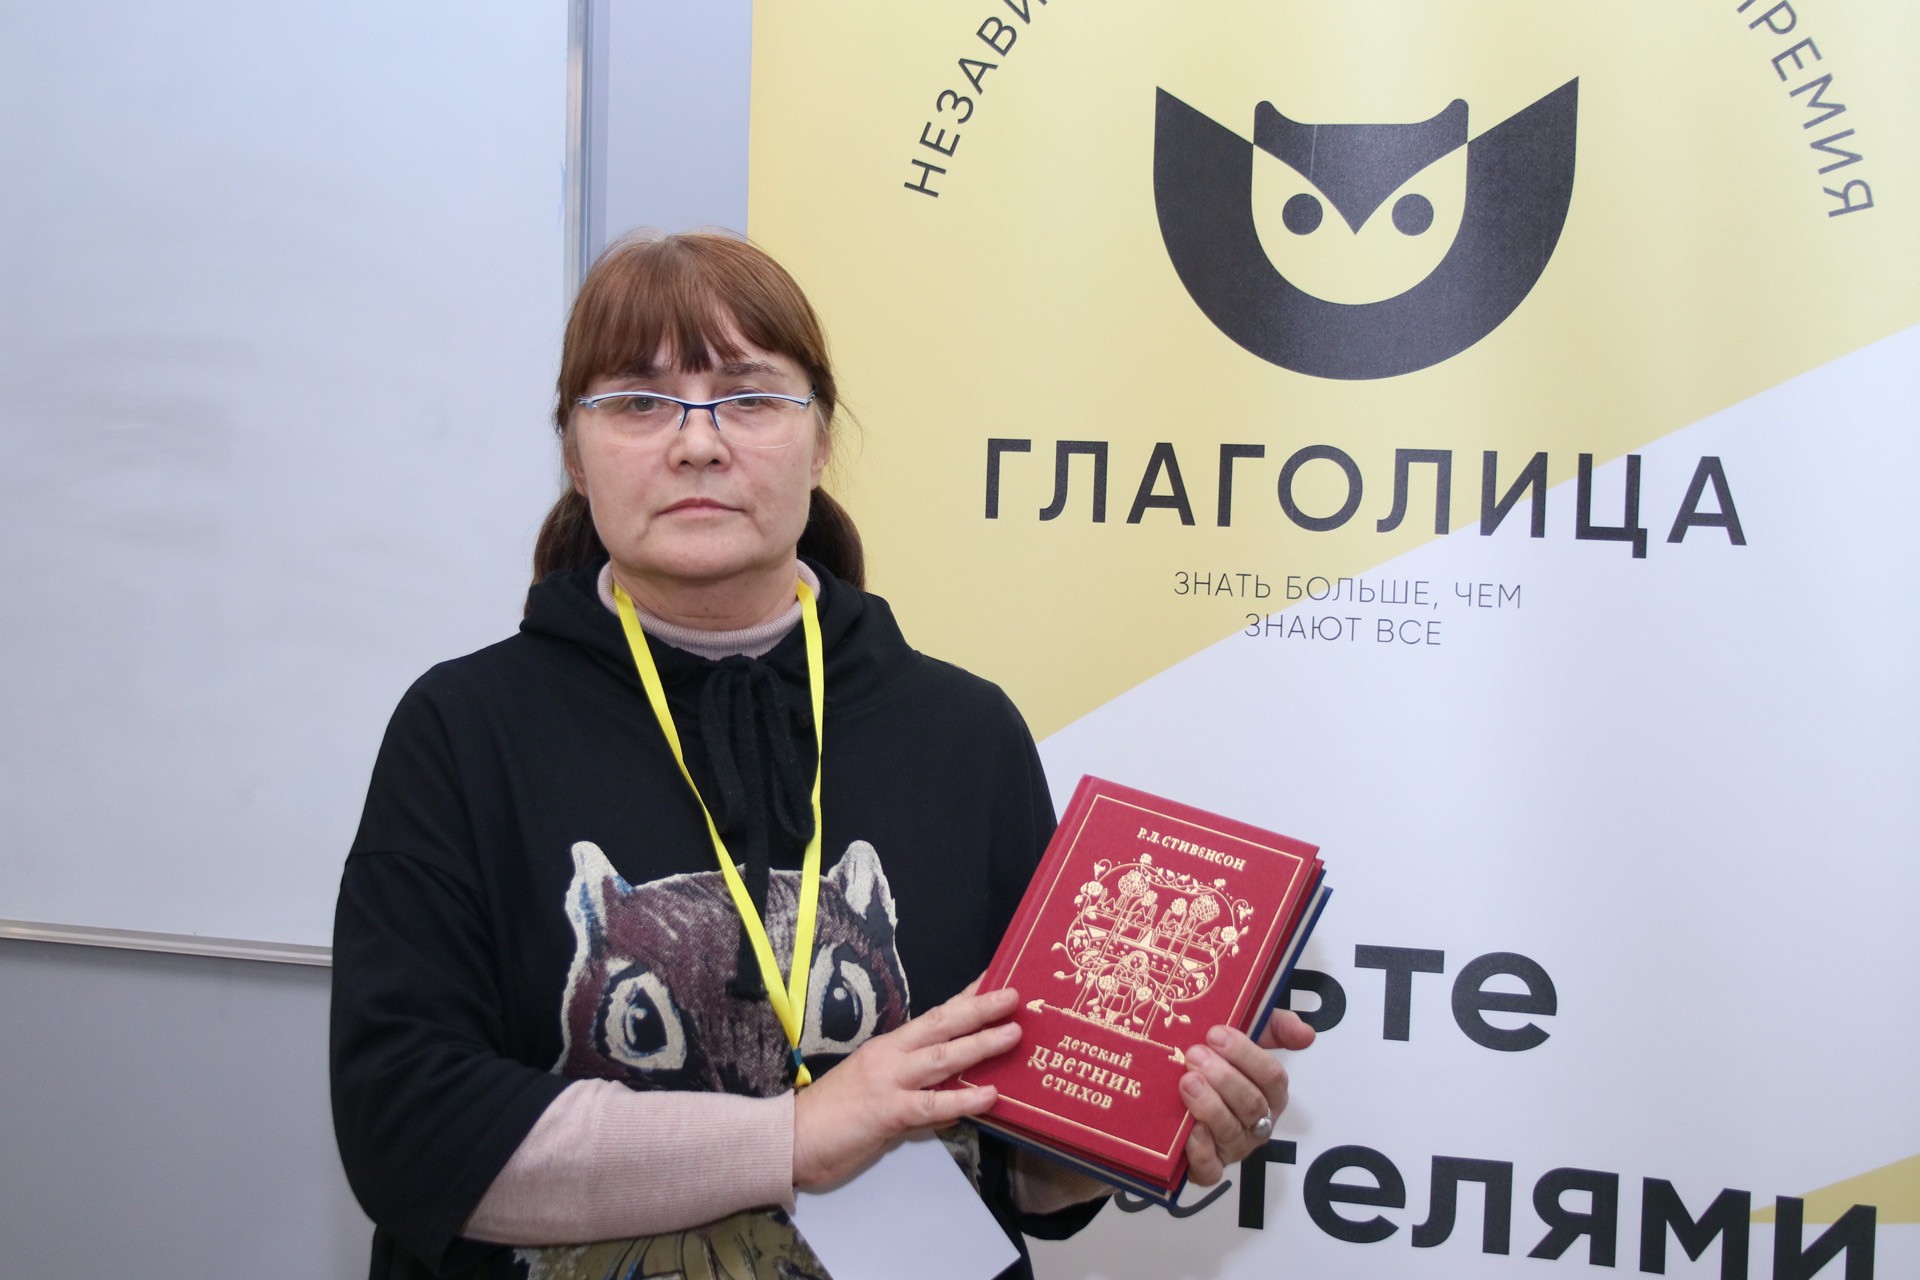 The Difficulties and Joys of Poetic Translation ,M.M. Lukashkina